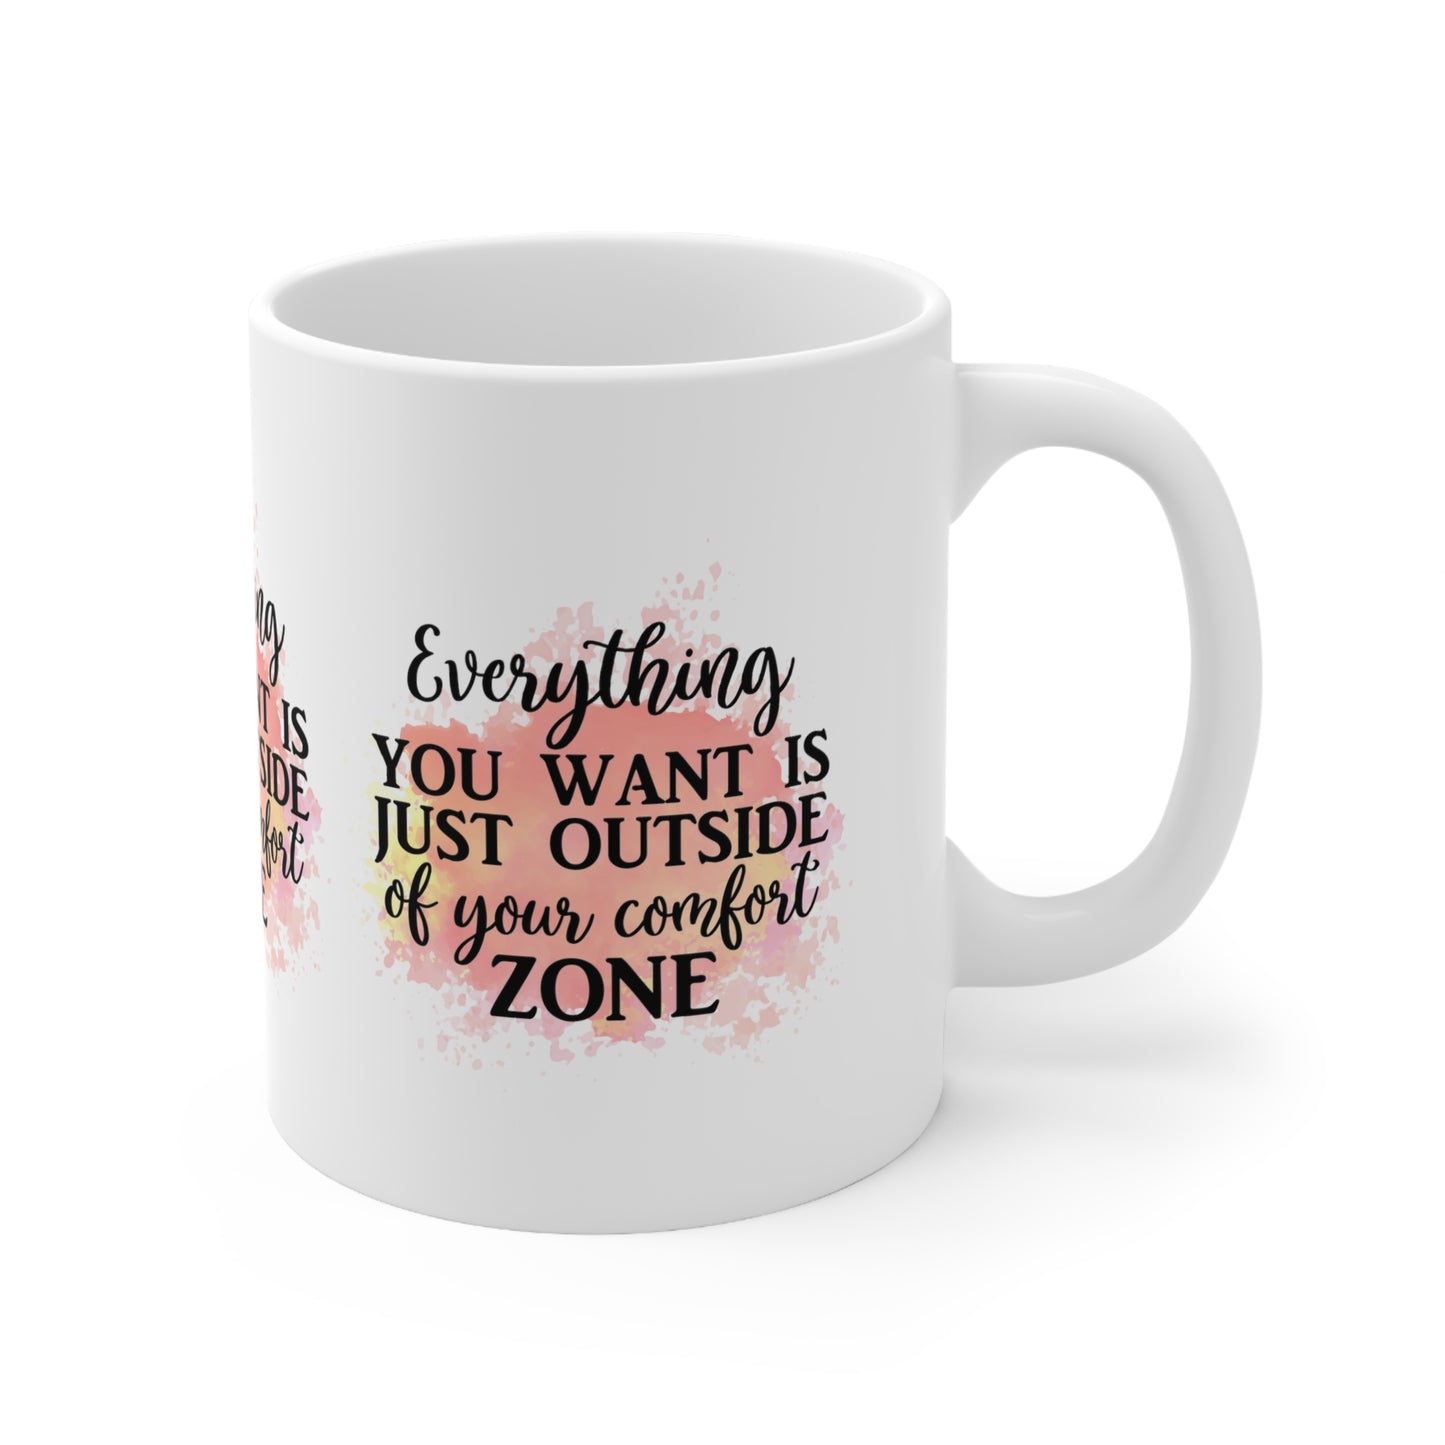 "EVERYTHING YOU WANT is Just Outside of your Comfort Zone" - INSPIRATIONAL MUG - MUGSCITY - Free Shipping